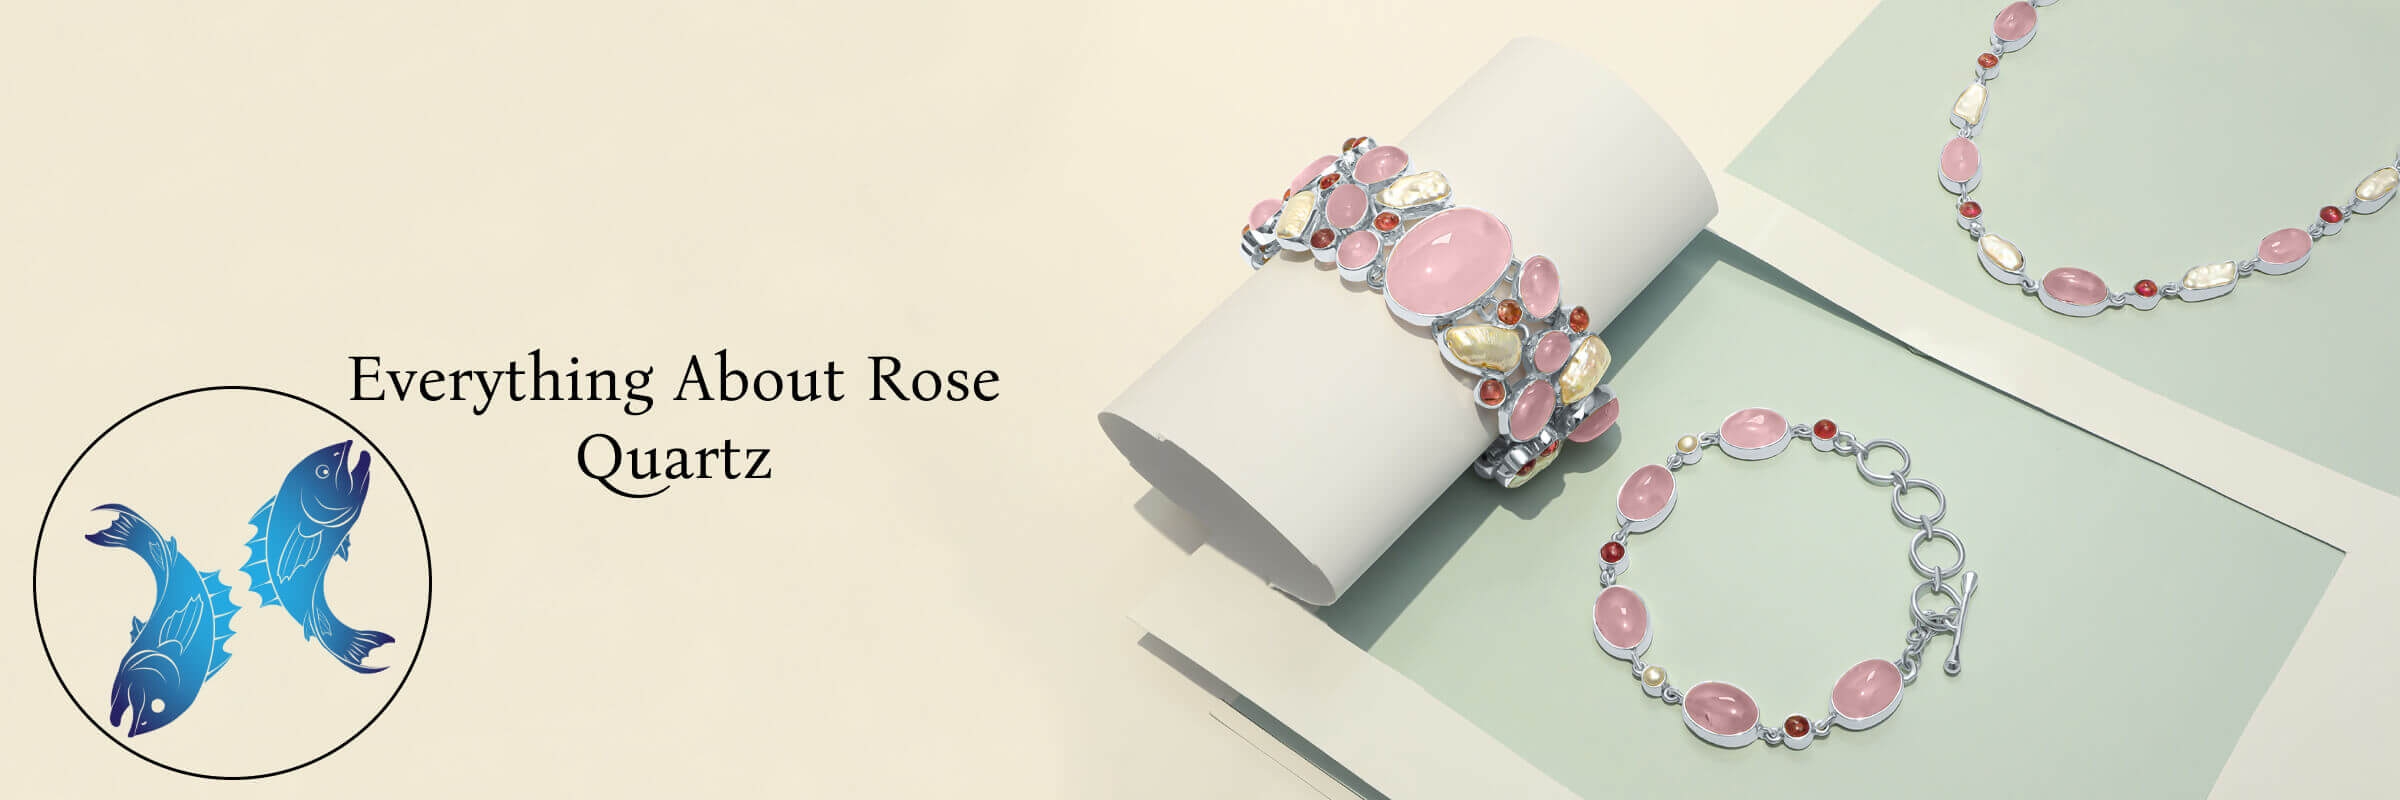 Rose quartz: Meaning, zodiac sign and benefits